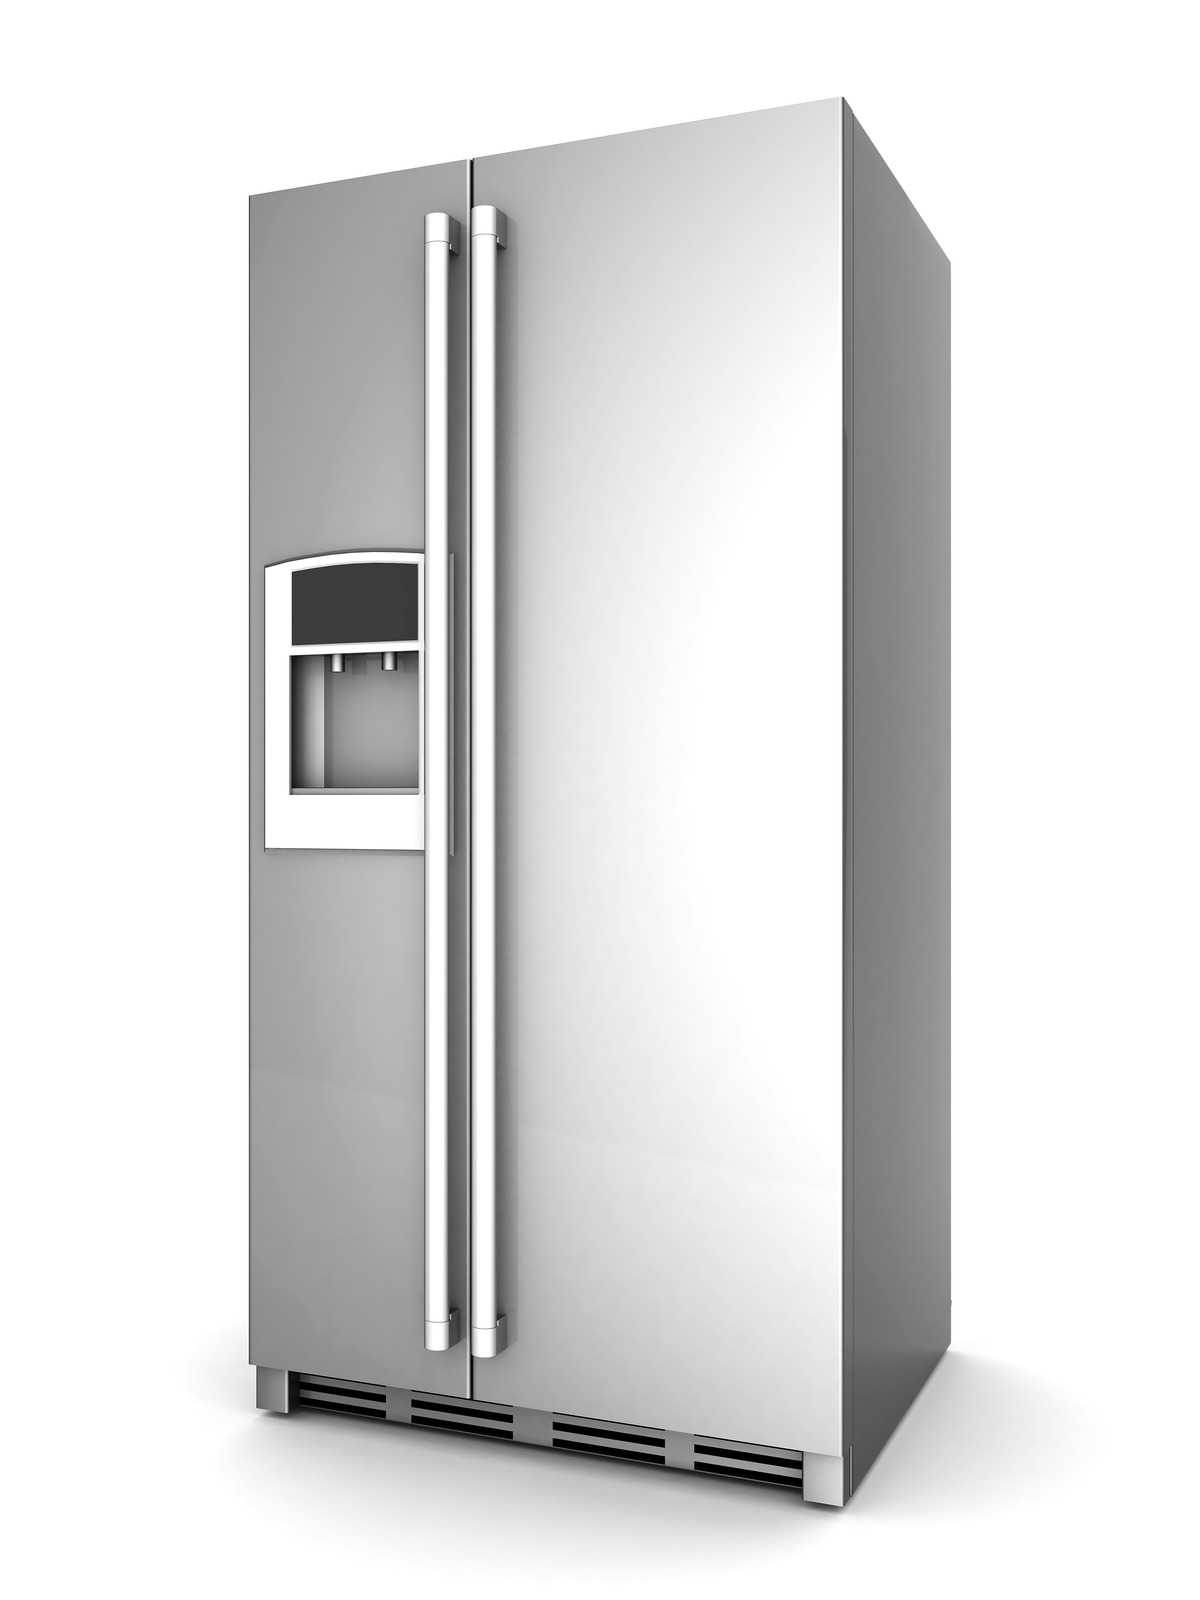 A side-by-side refrigerator with the doors open